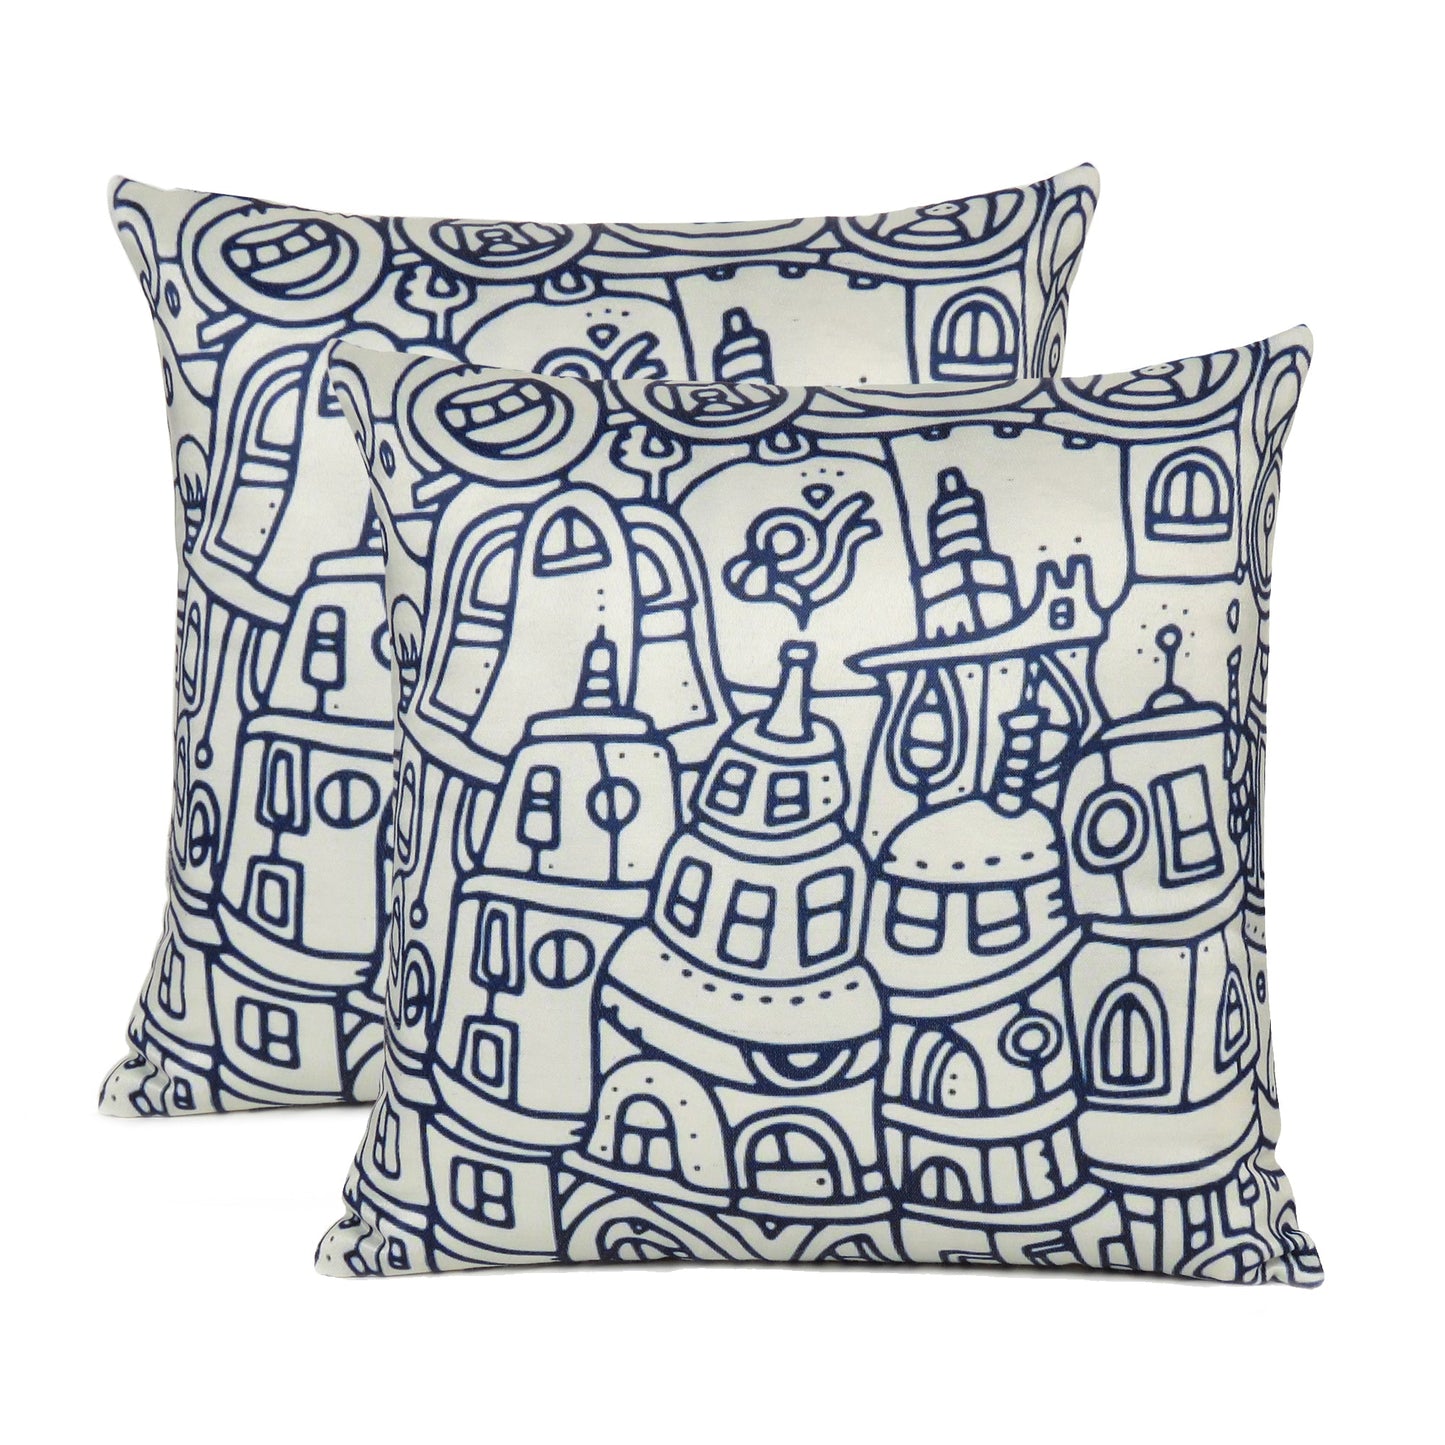 Blue Doodle City Printed Cushion Cover in Set of 2